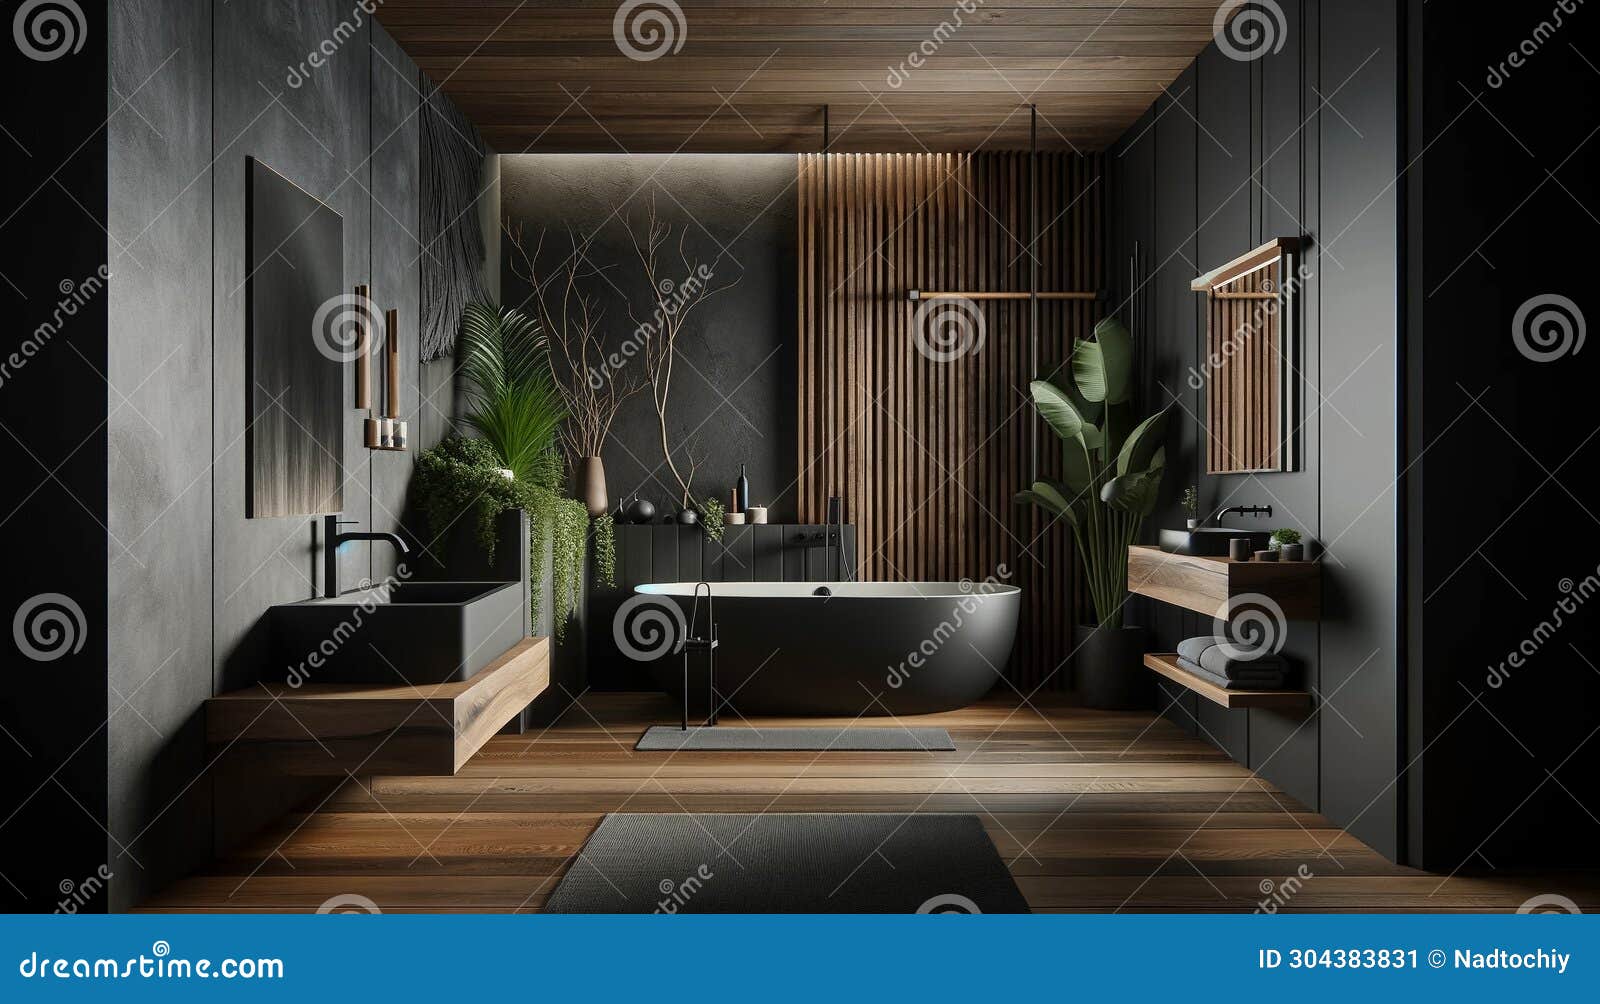 A Modern Bathroom with a Dark Interior, Designed in a Natural Style ...